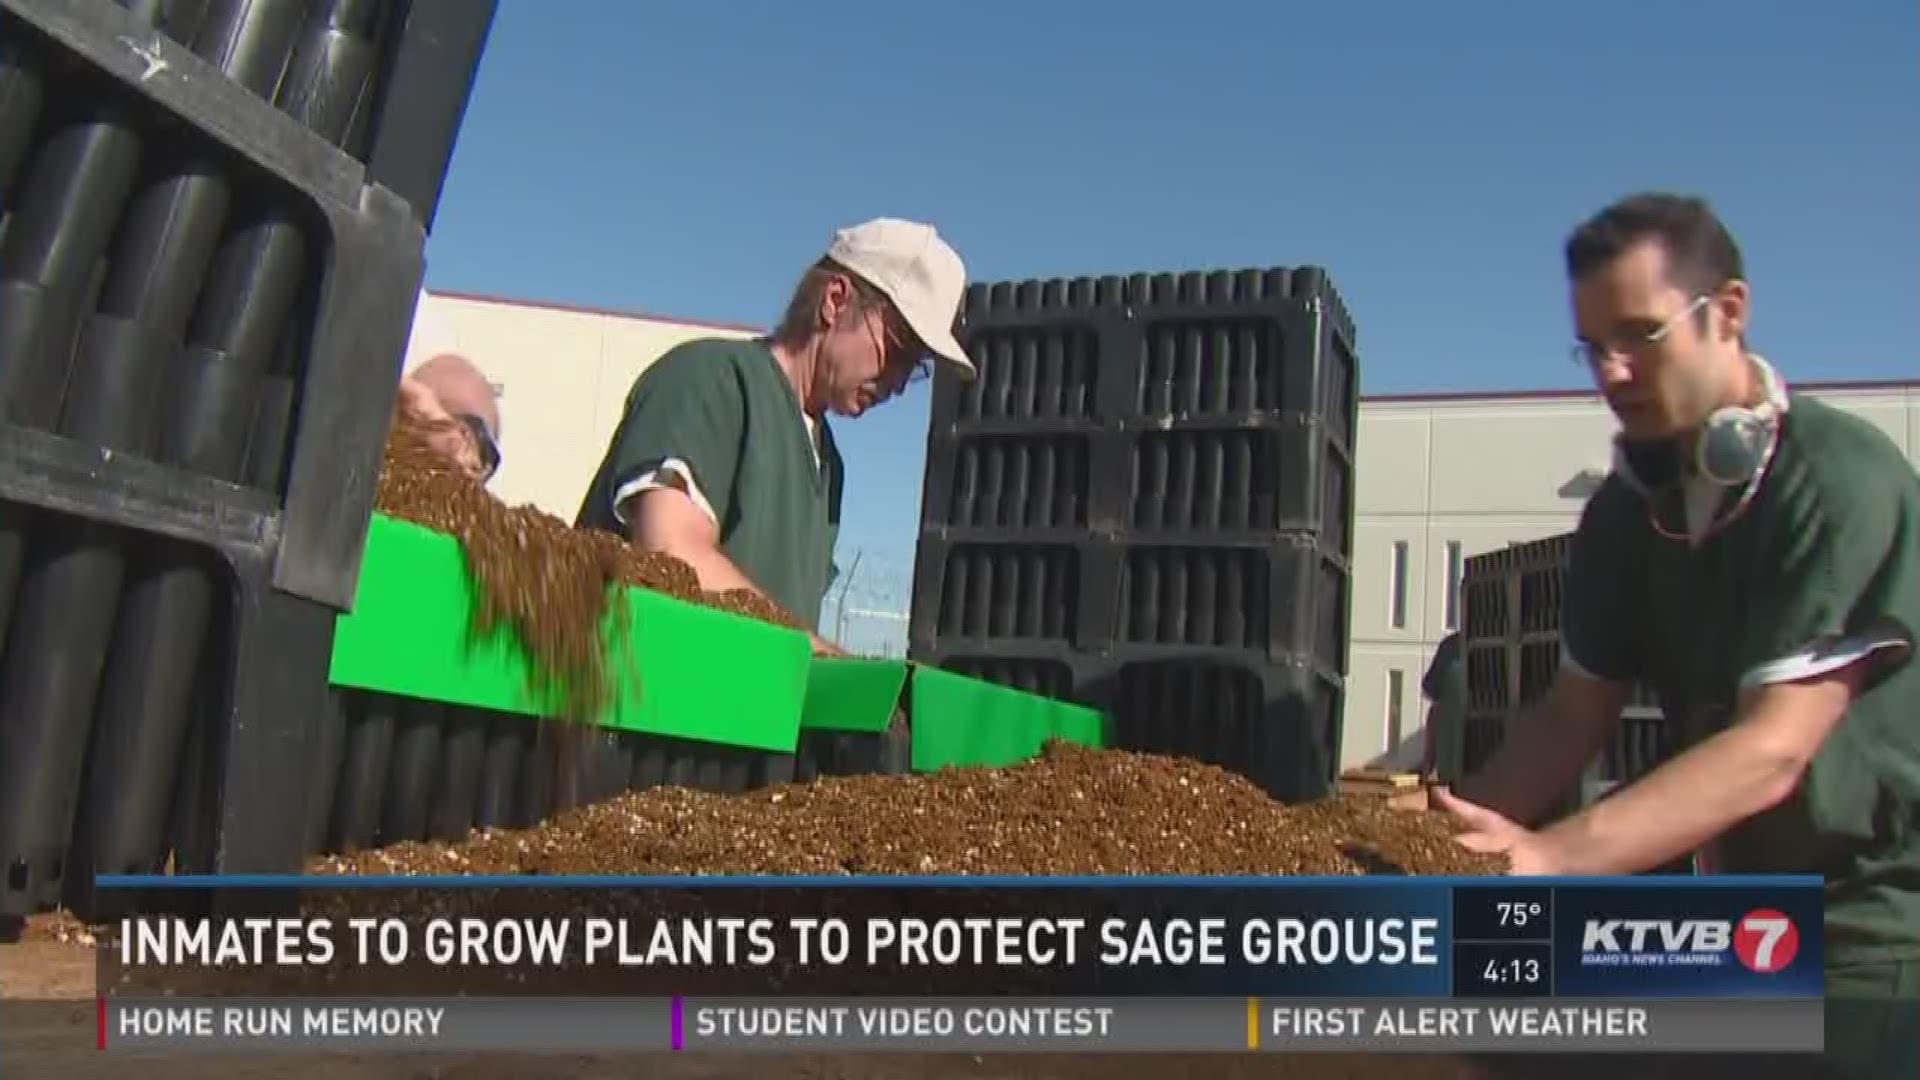 Inmates plant seeds to protect sagegrouse